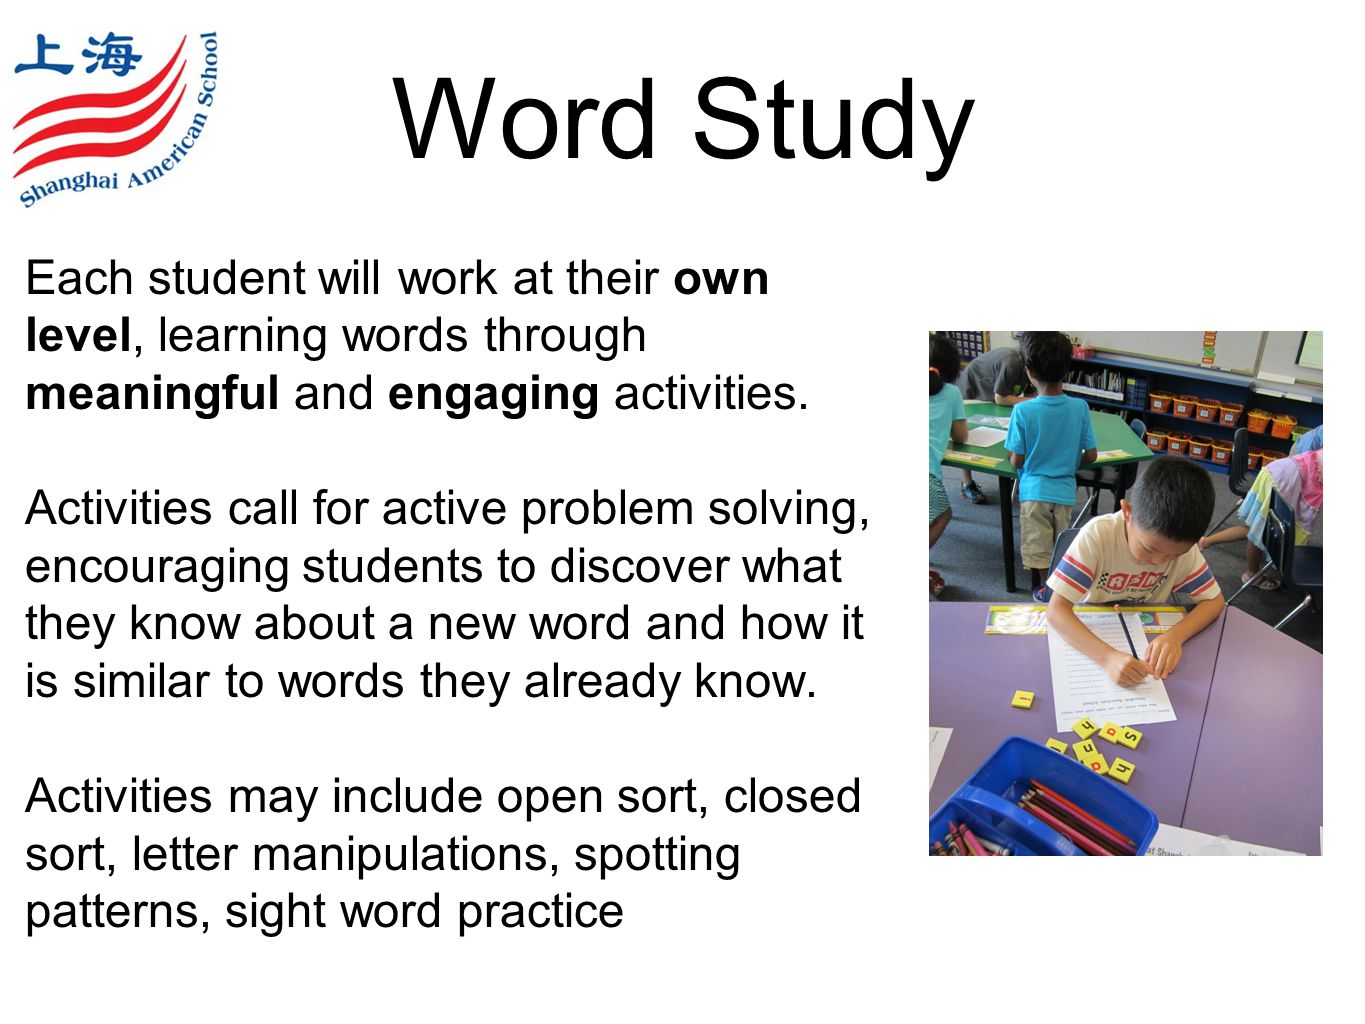 Word Study Each student will work at their own level, learning words through meaningful and engaging activities.